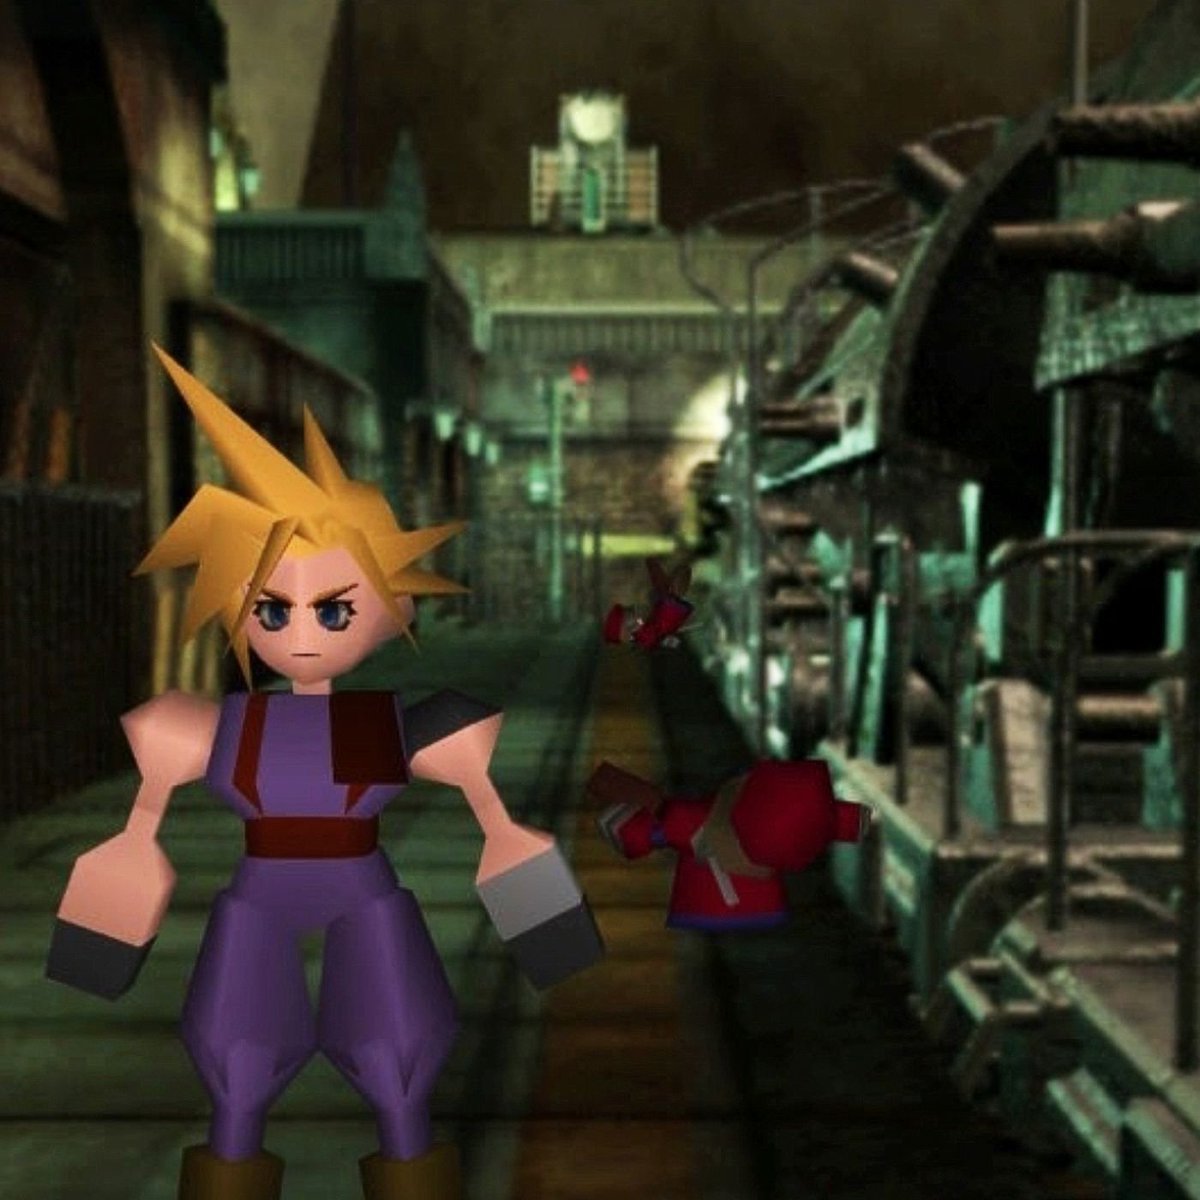 Sidenote, is anyone else getting Cloud vibes from Final Fantasy VII on PlayStation?  #gamedev